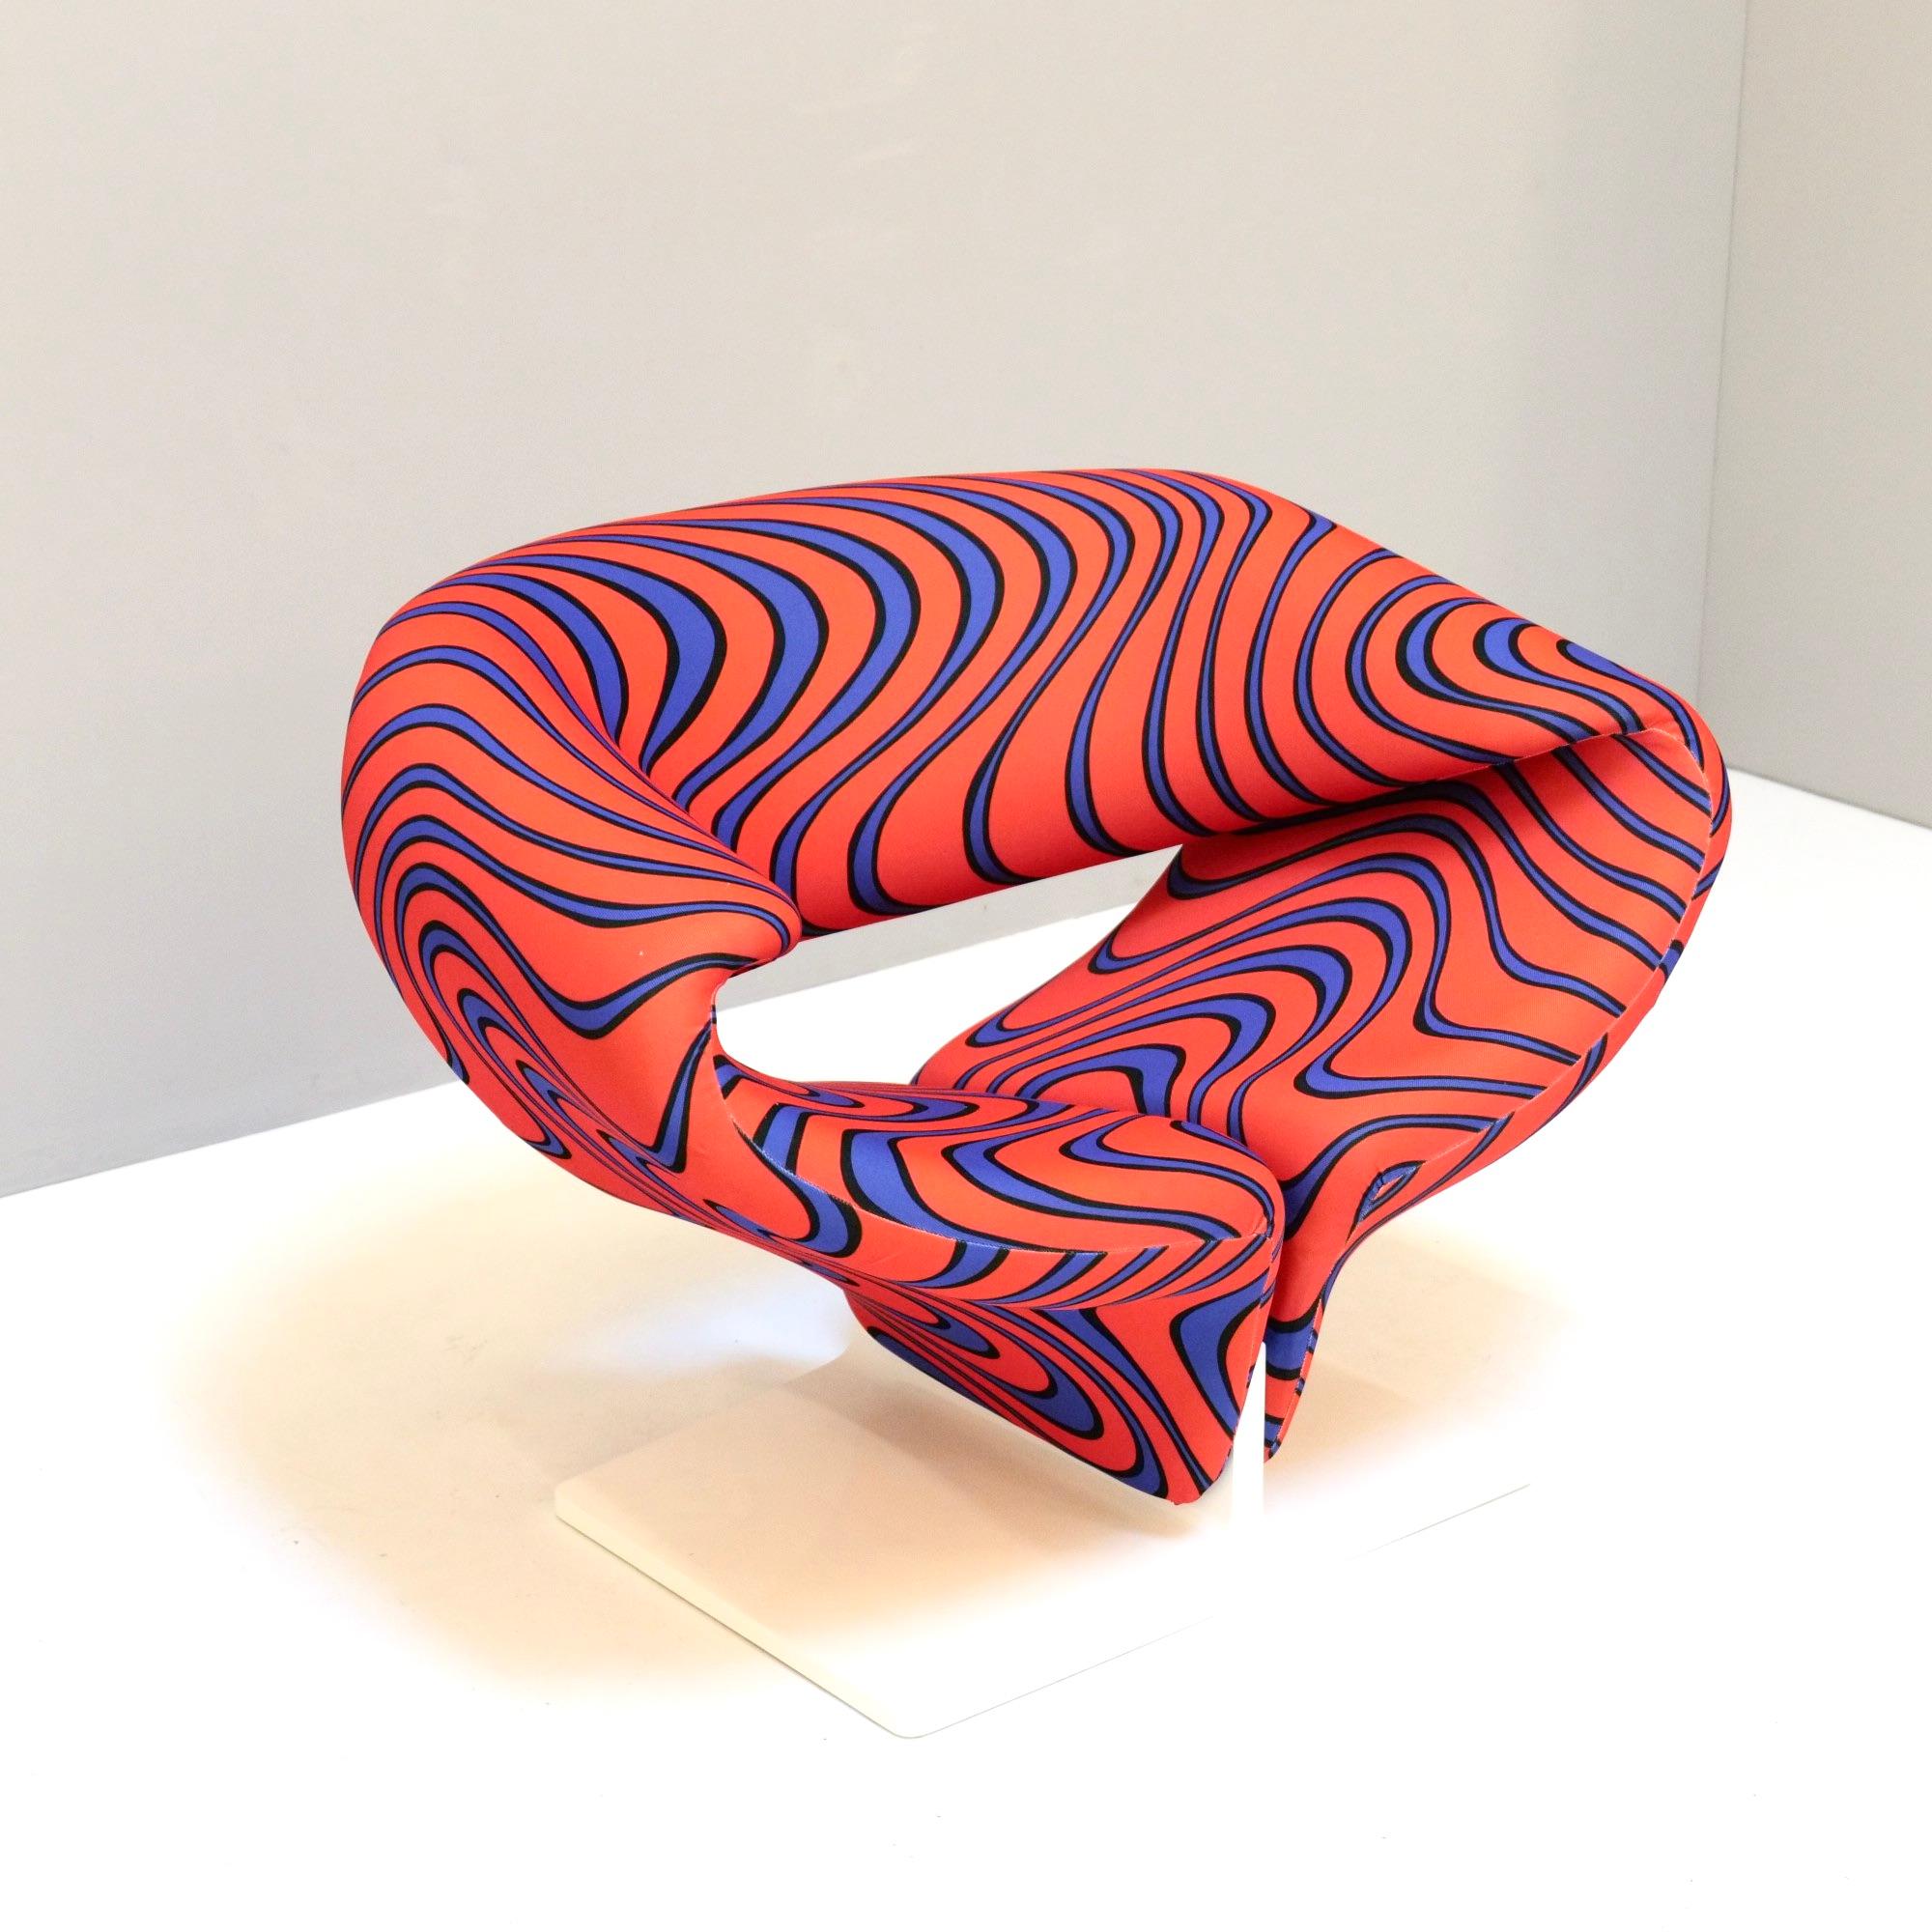 Space Age Ribbon Chair F582 by Pierre Paulin & Jack Lenor Larsen fabrics for Artifort For Sale